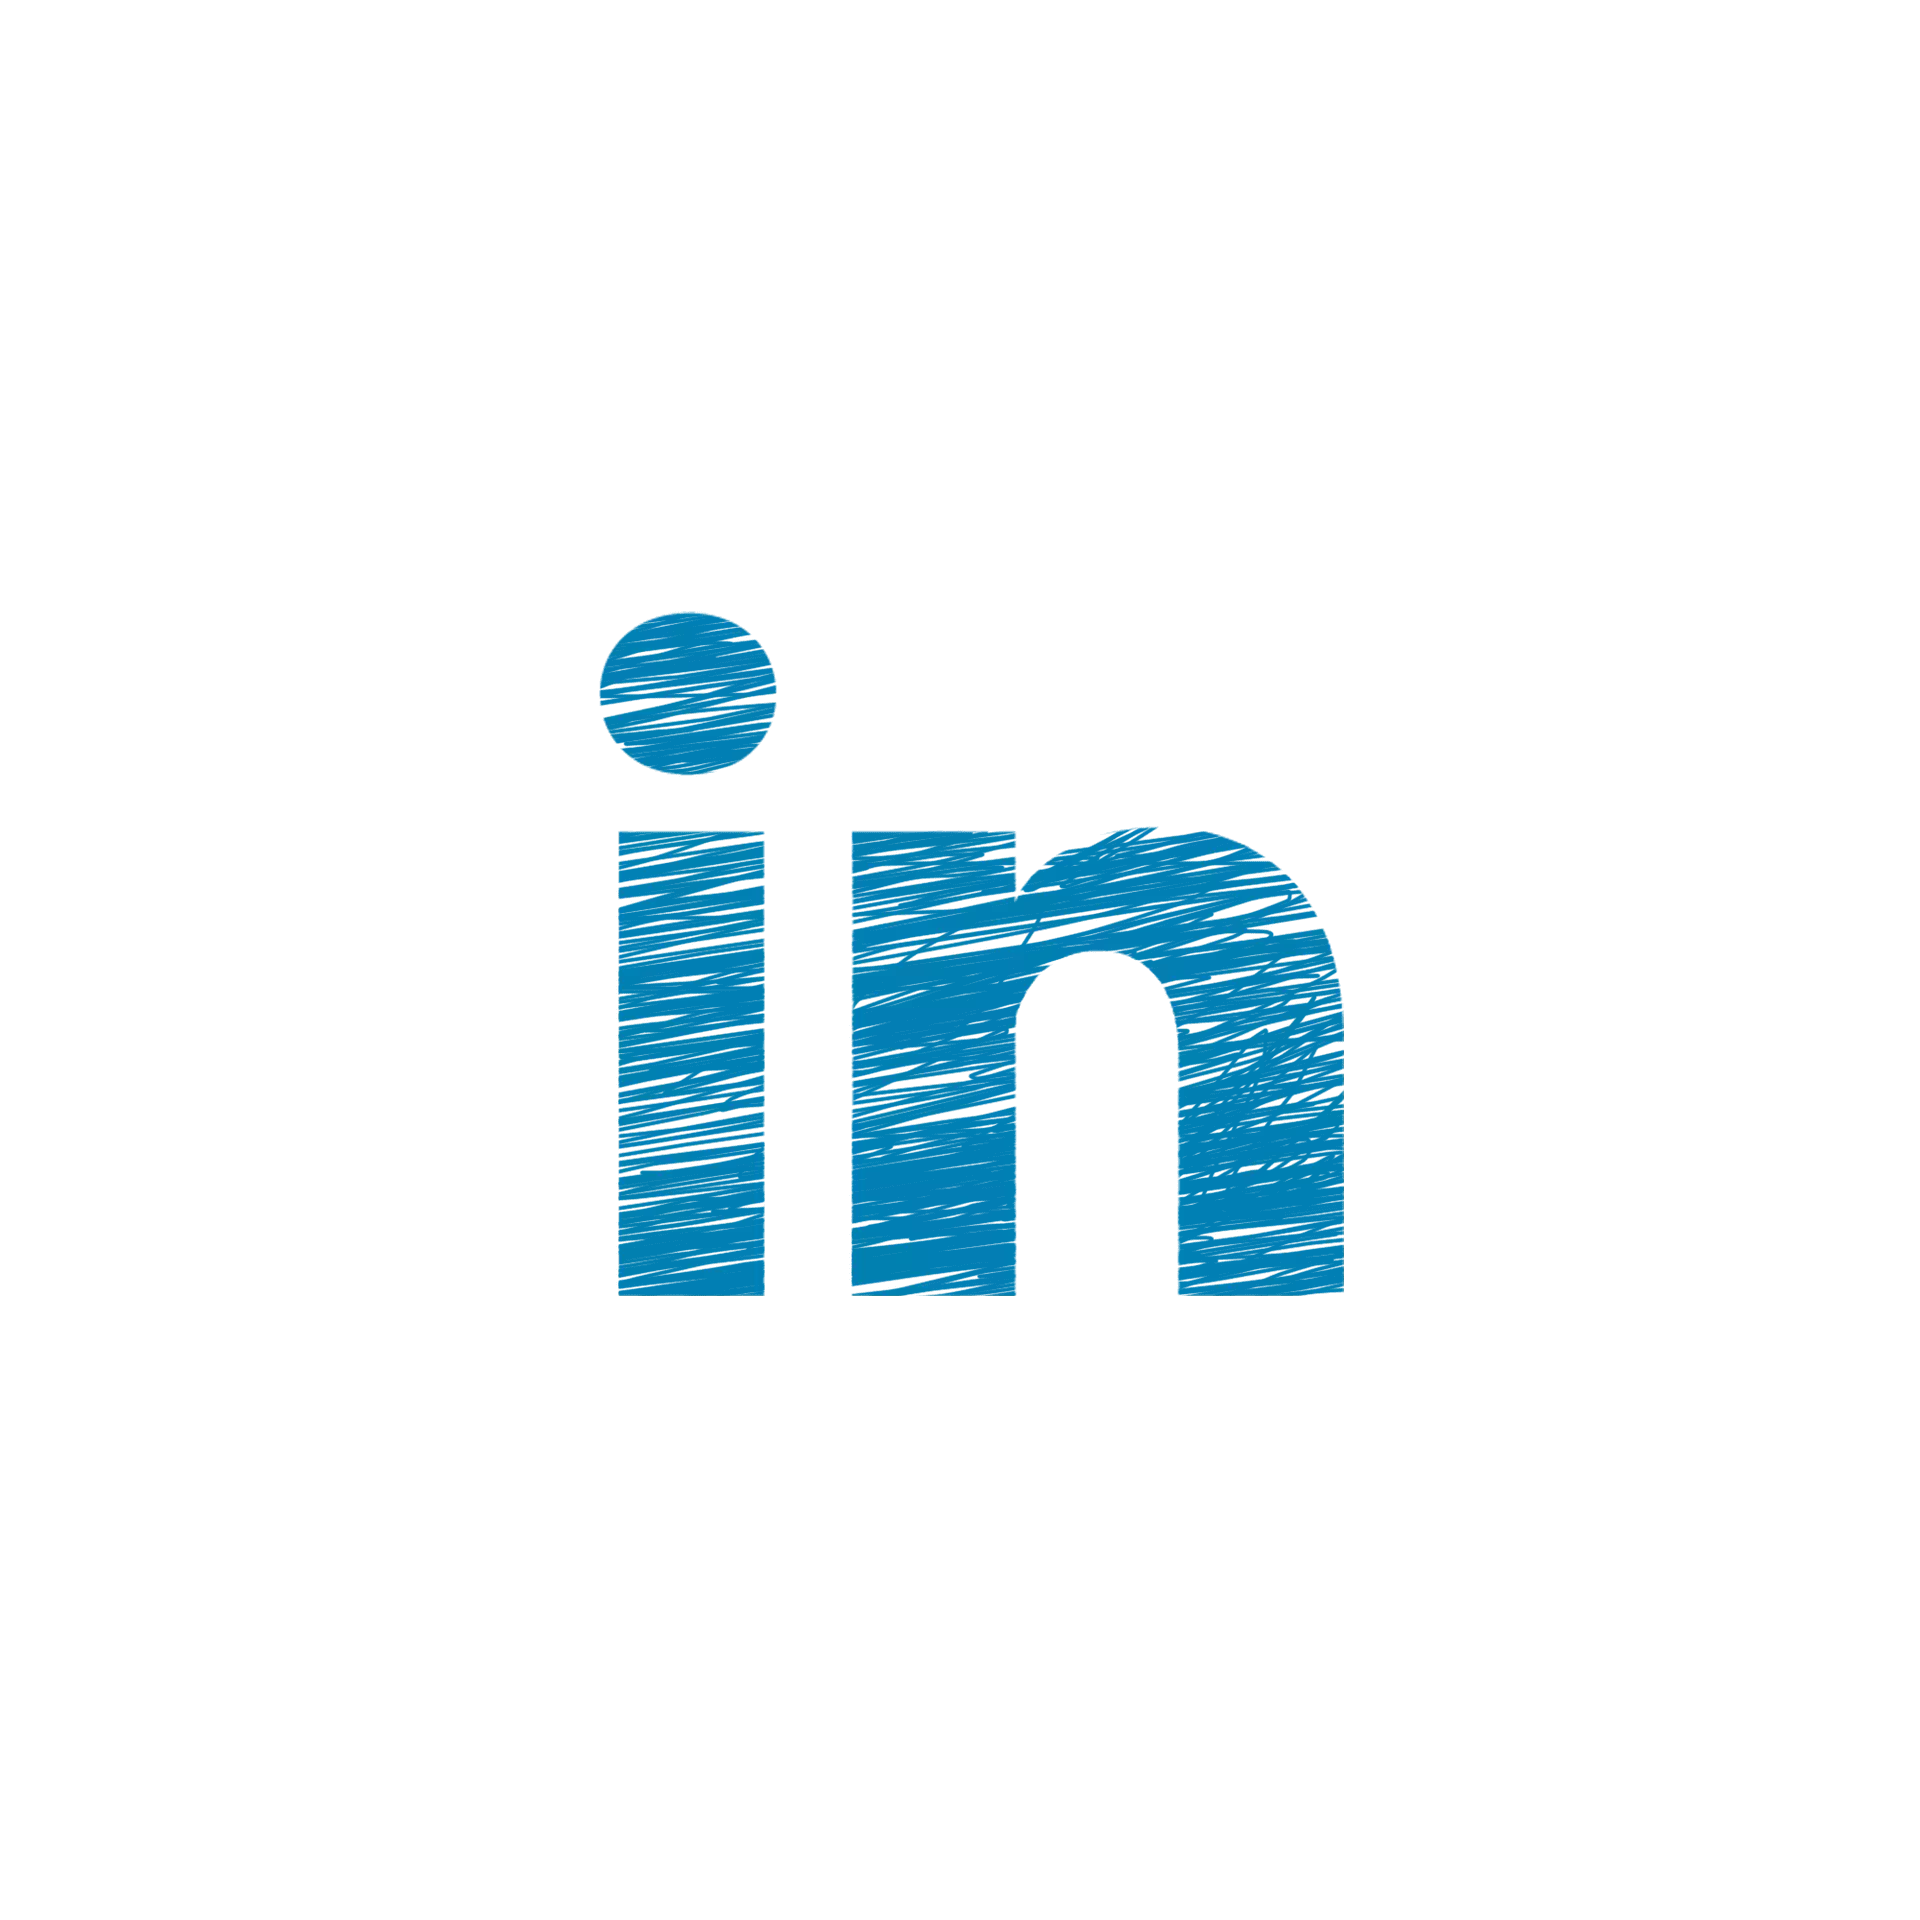 How to add promotion on Linkedin